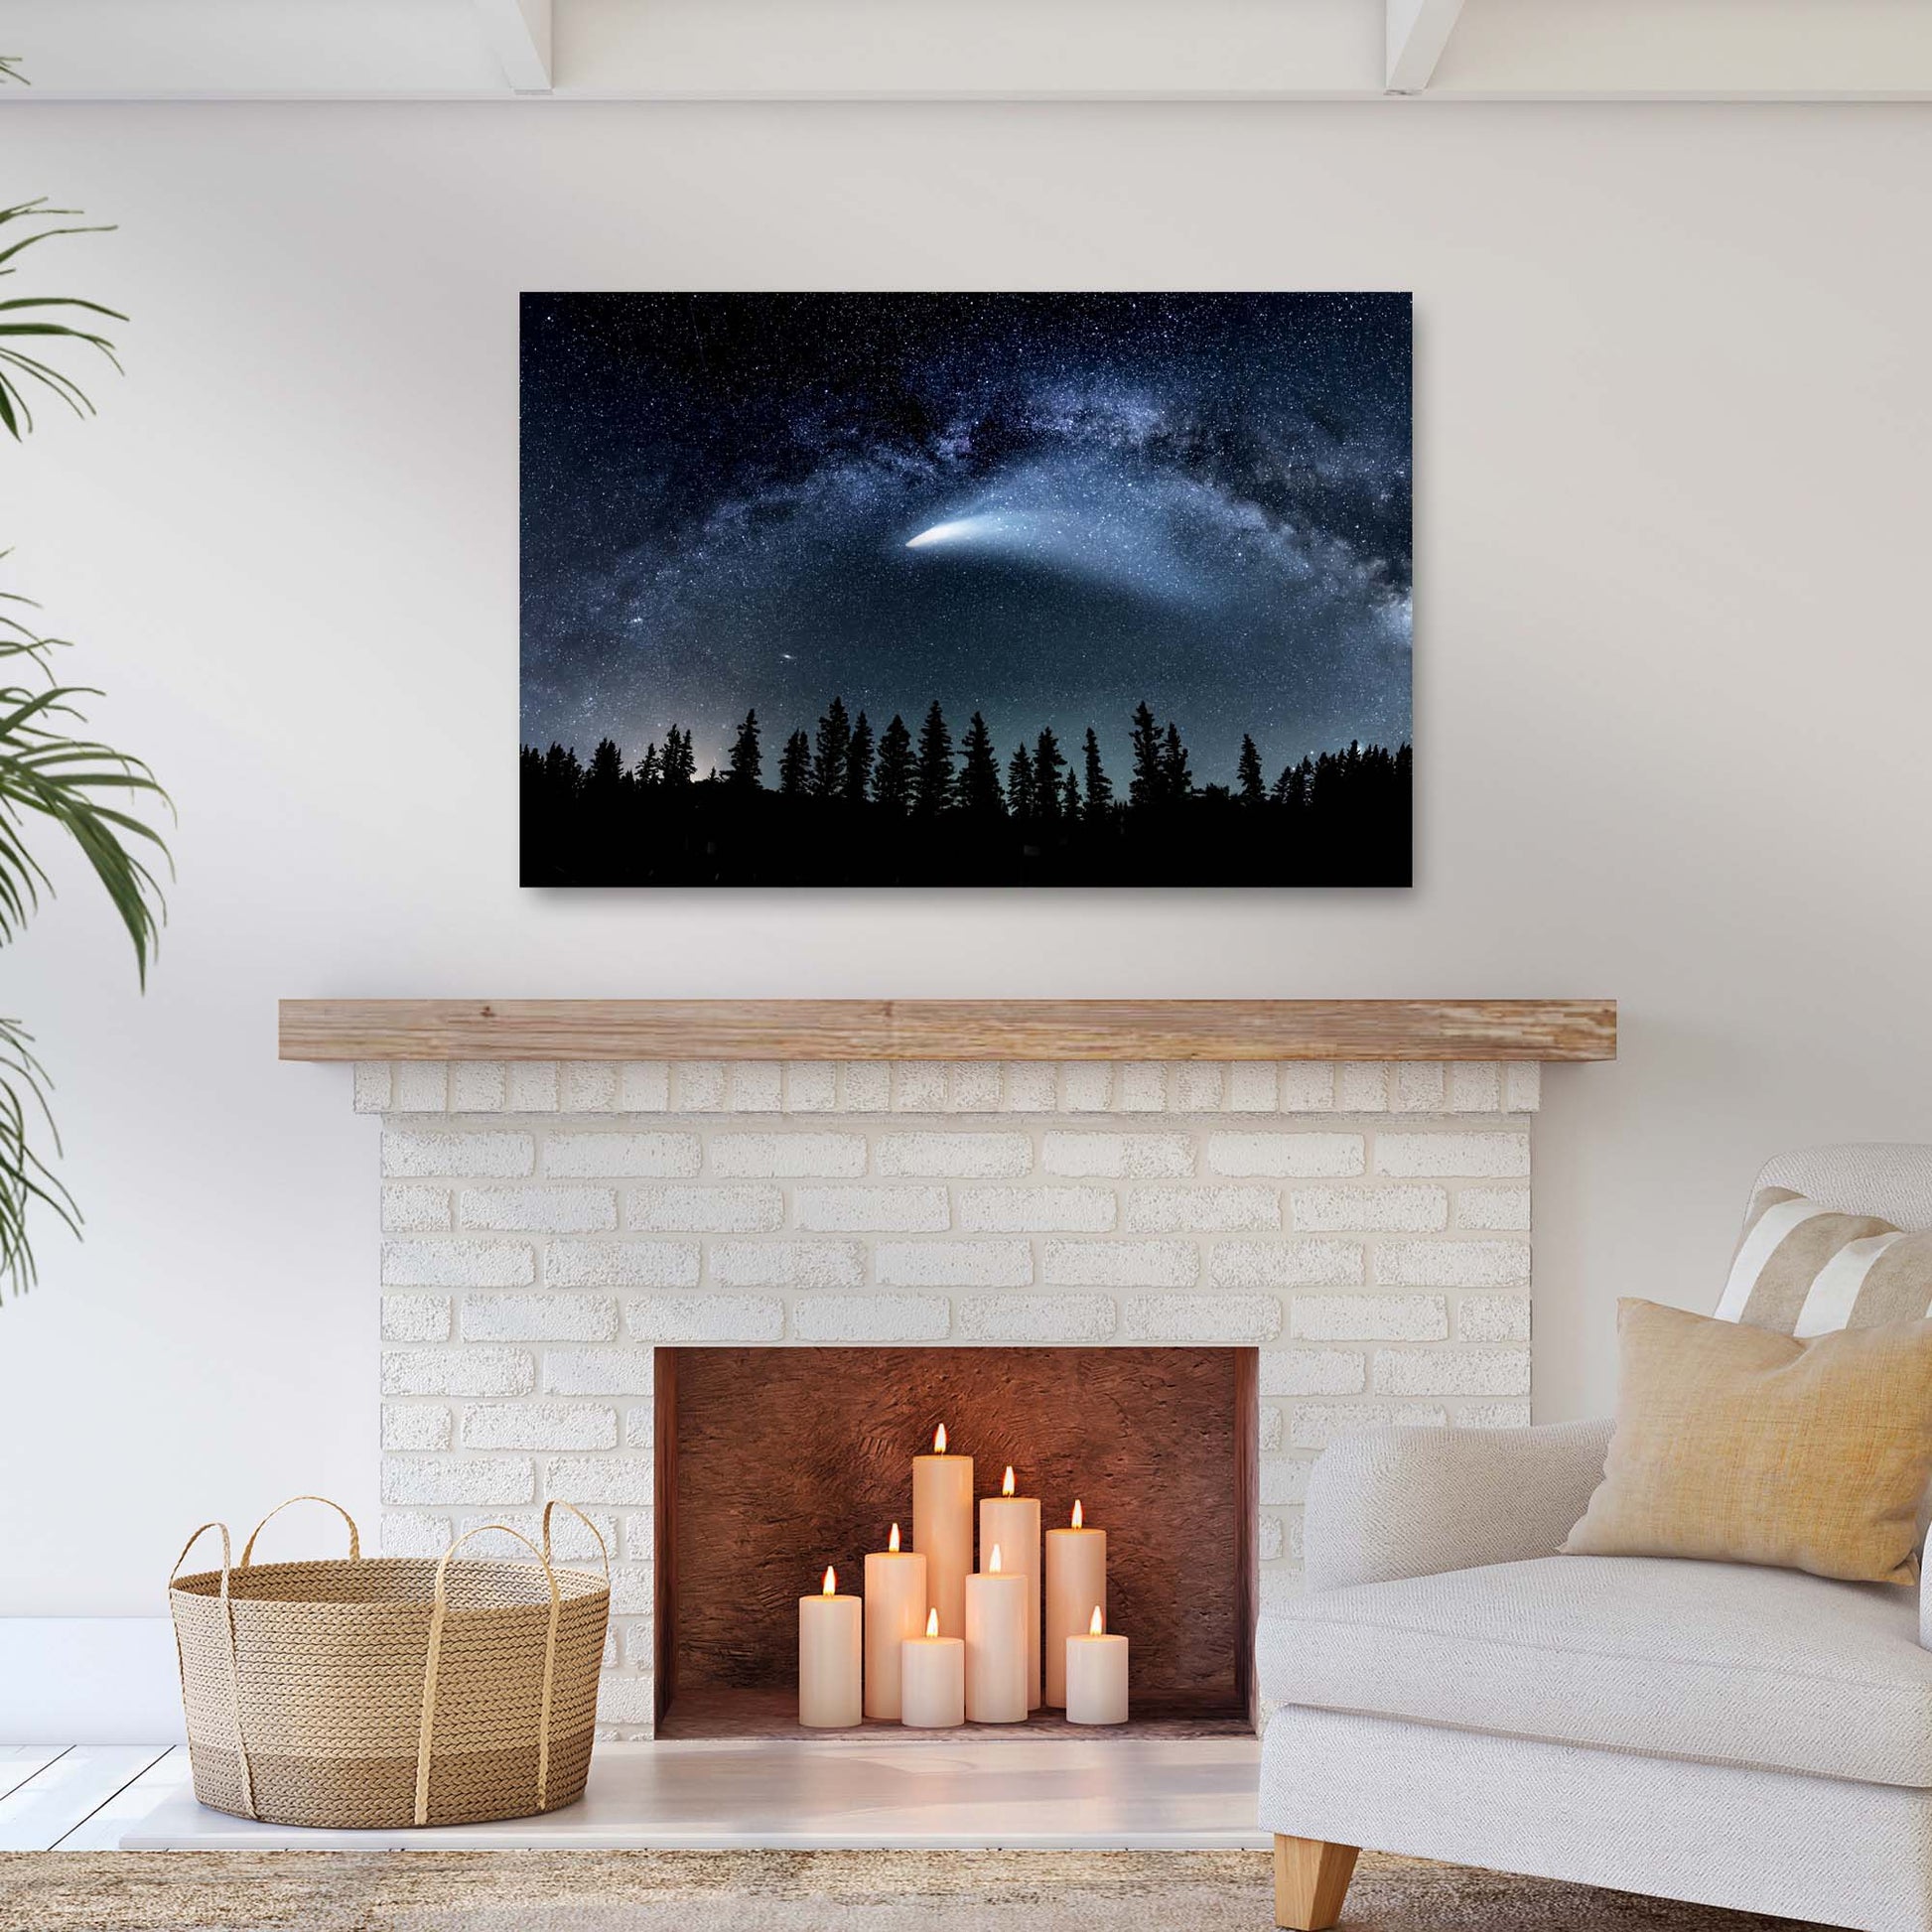 Comet Neowise Canvas Wall Art Style 1 - Image by Tailored Canvases